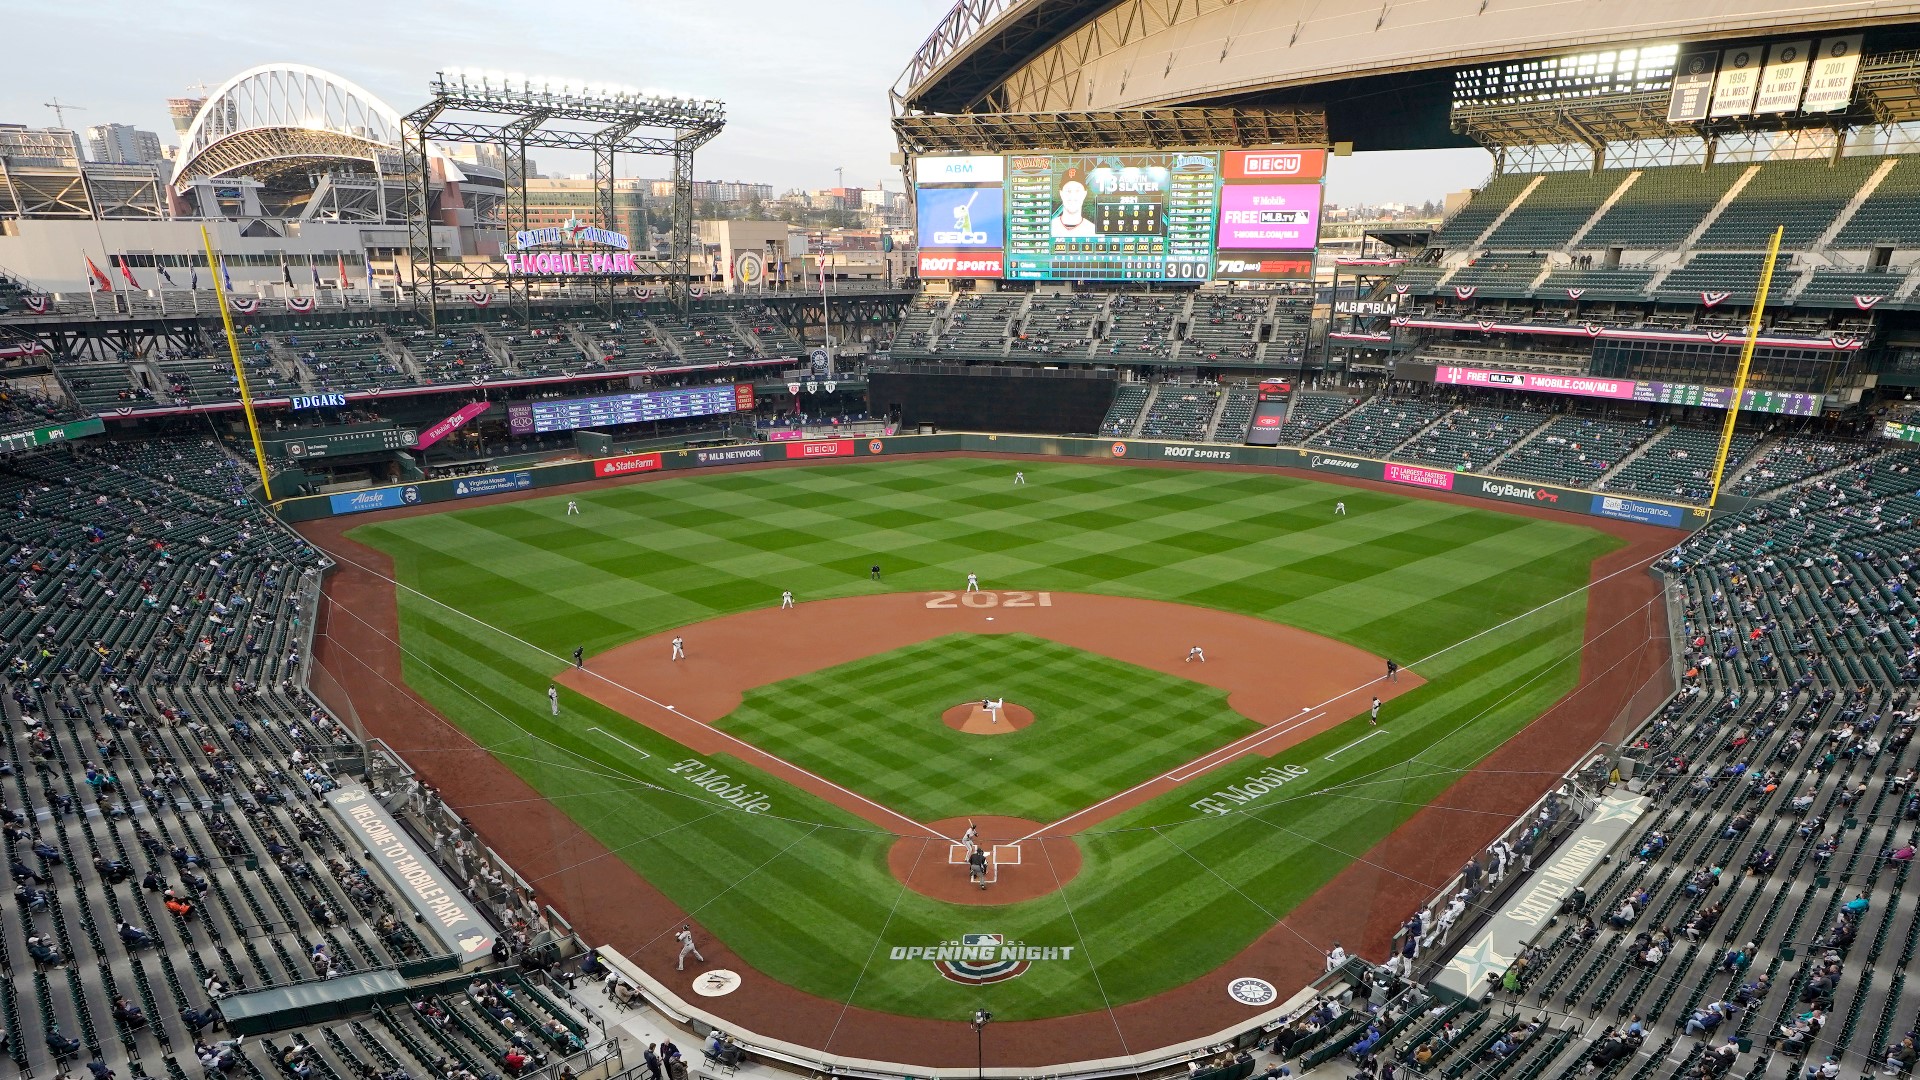 This will be the third time Seattle will host the All-Stars.